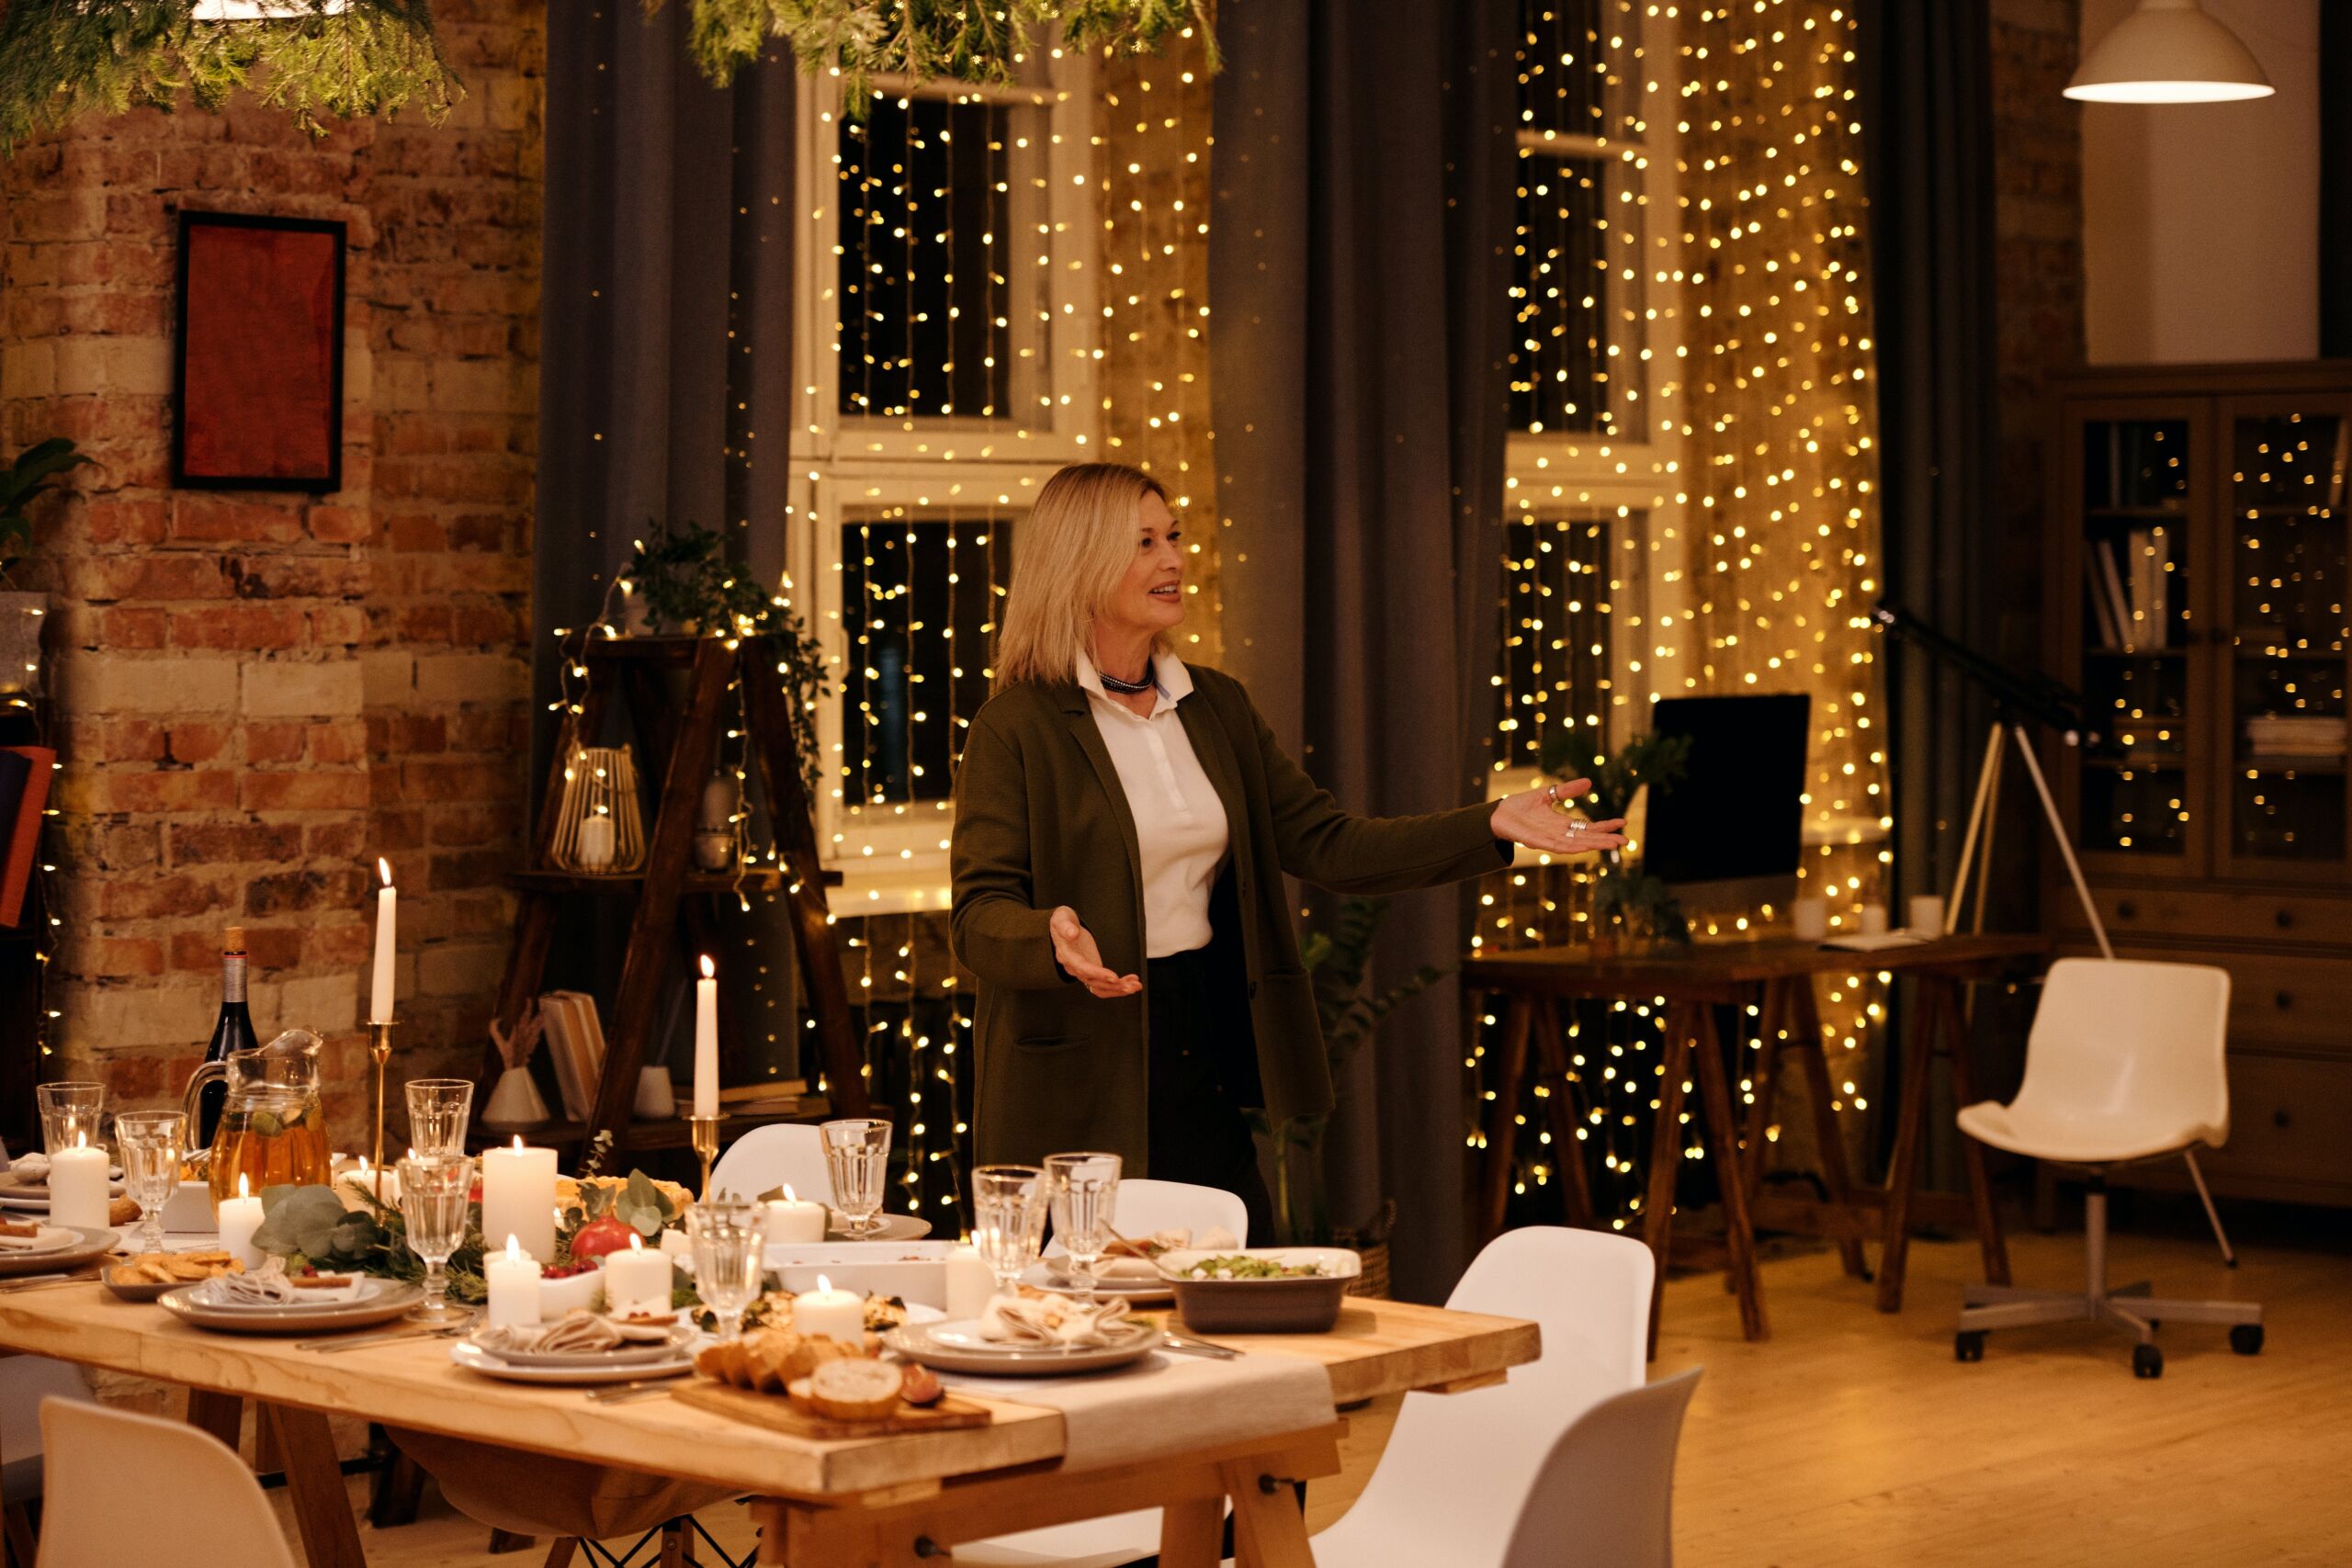 True Hospitality Makes Solid Happiness - Middle-aged lady receives her guests with open arms at an attractively set table. Room decorated with Christmas lights at the back.